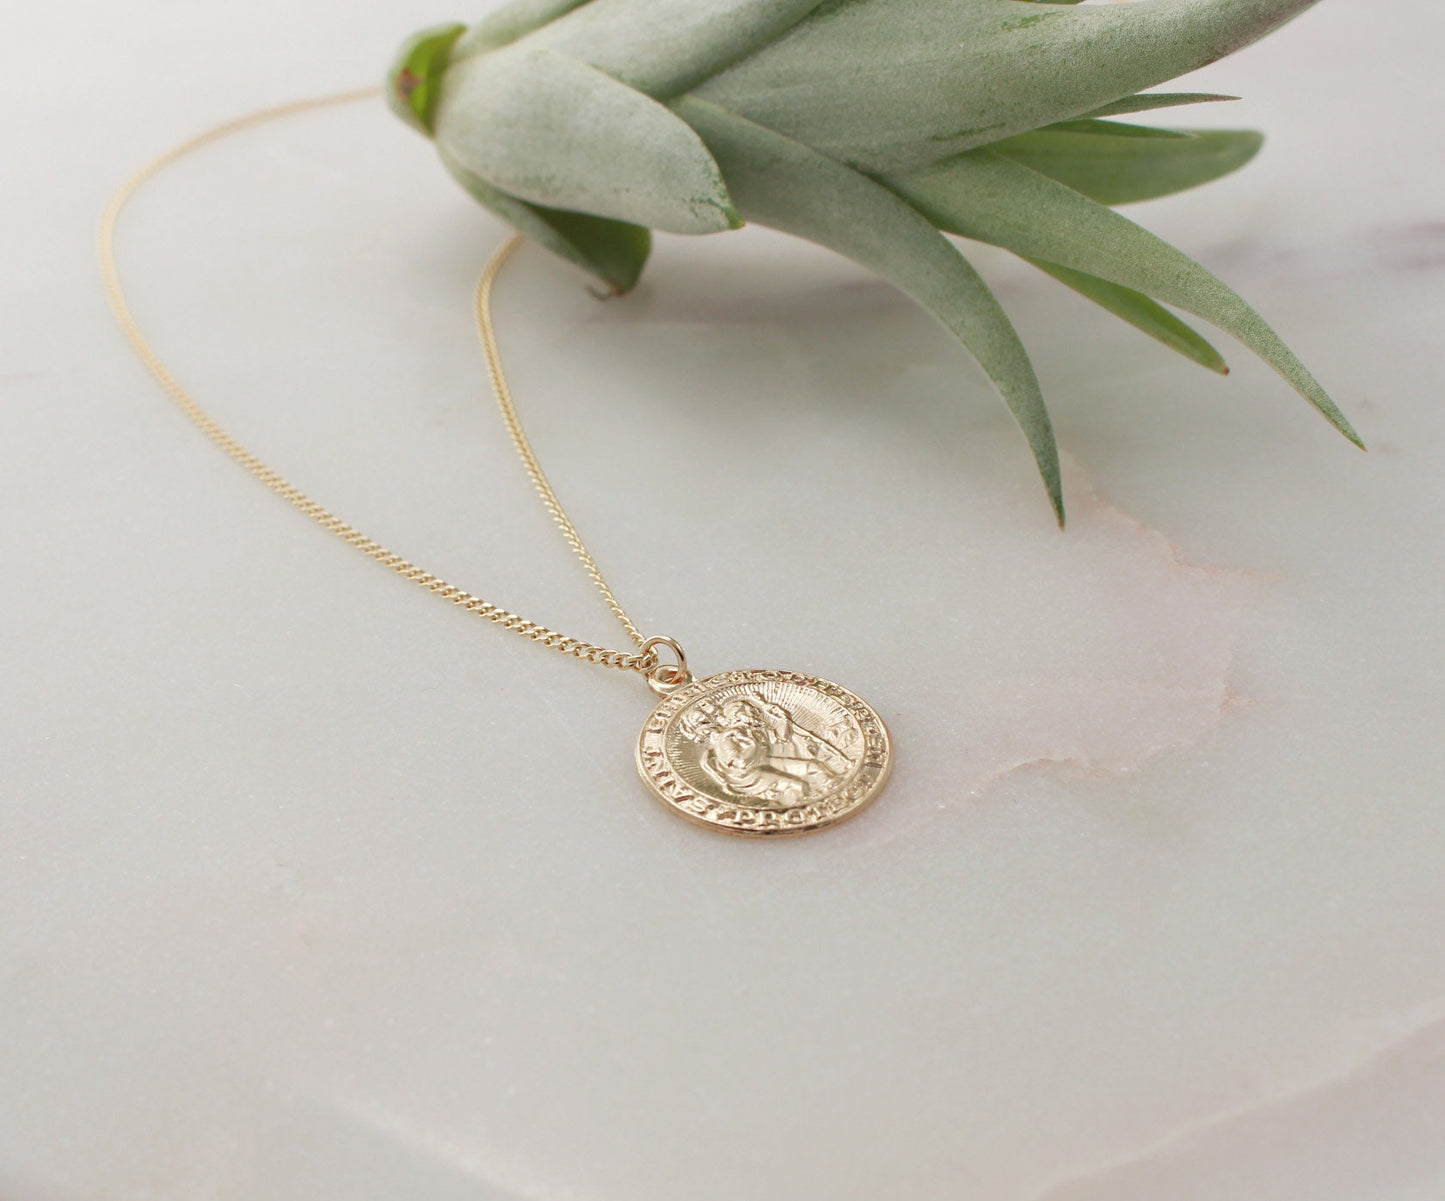 Gold Filled Medallion Necklace(heavy chain), St Christopher Charm, Round - 14k Gold Filled Charm and Chain, Coin Size 17.5mm